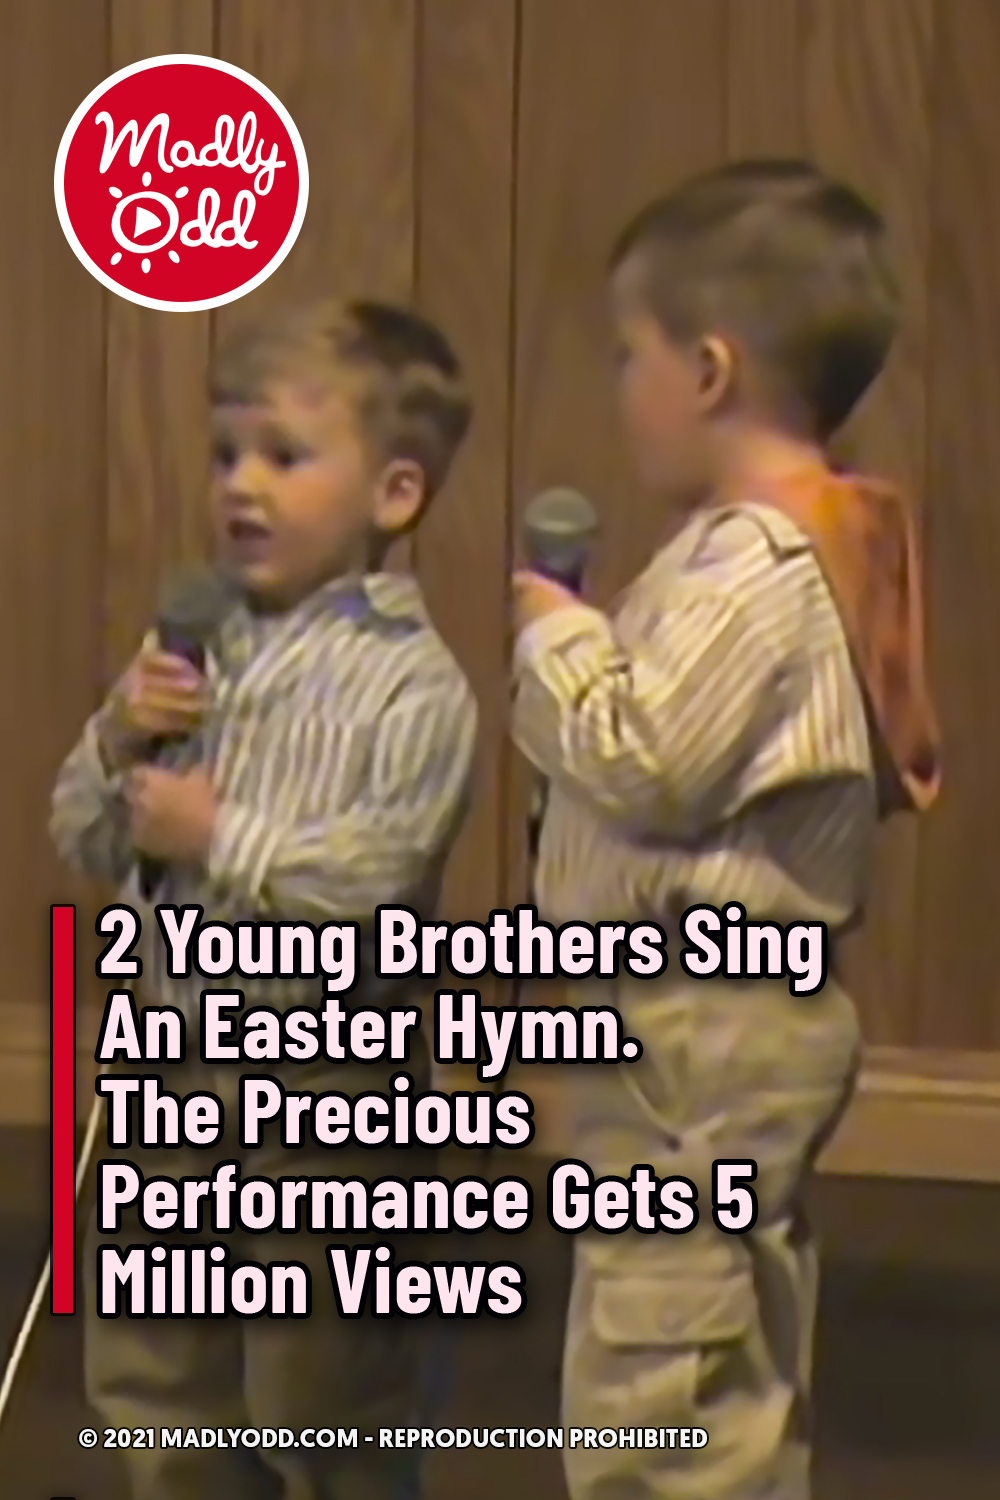 2 Young Brothers Sing An Easter Hymn. The Precious Performance Gets 5 Million Views